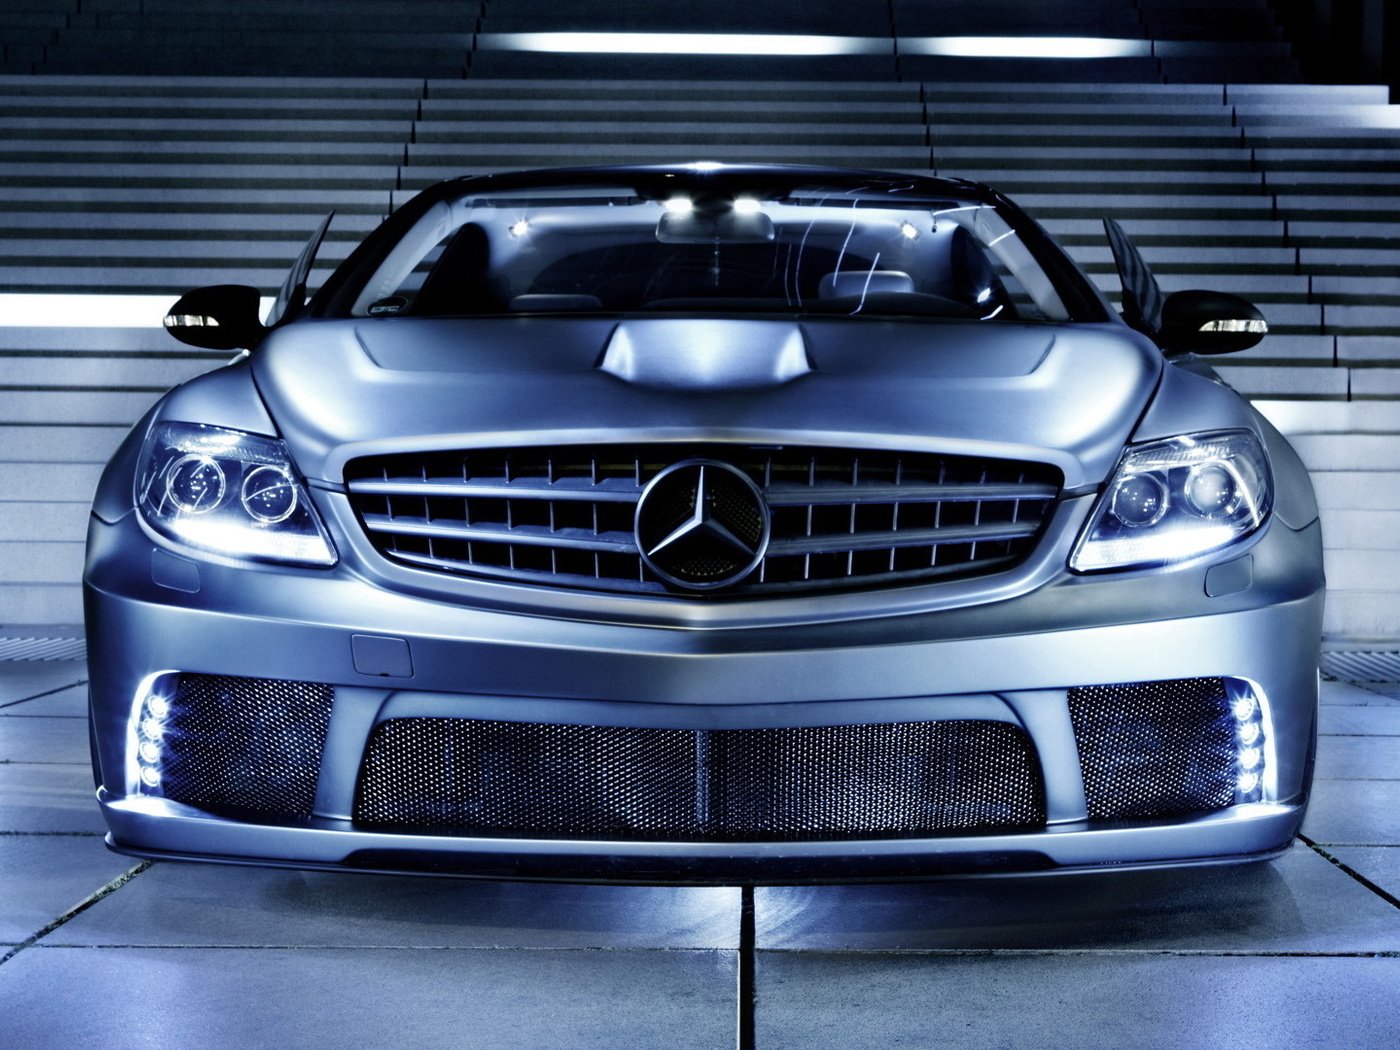 Mercedes parts. CL 63 AMG. Mercedes CL 63. Cl63 AMG Tuning. Mercedes Benz CLS 63 AMG Tuning.